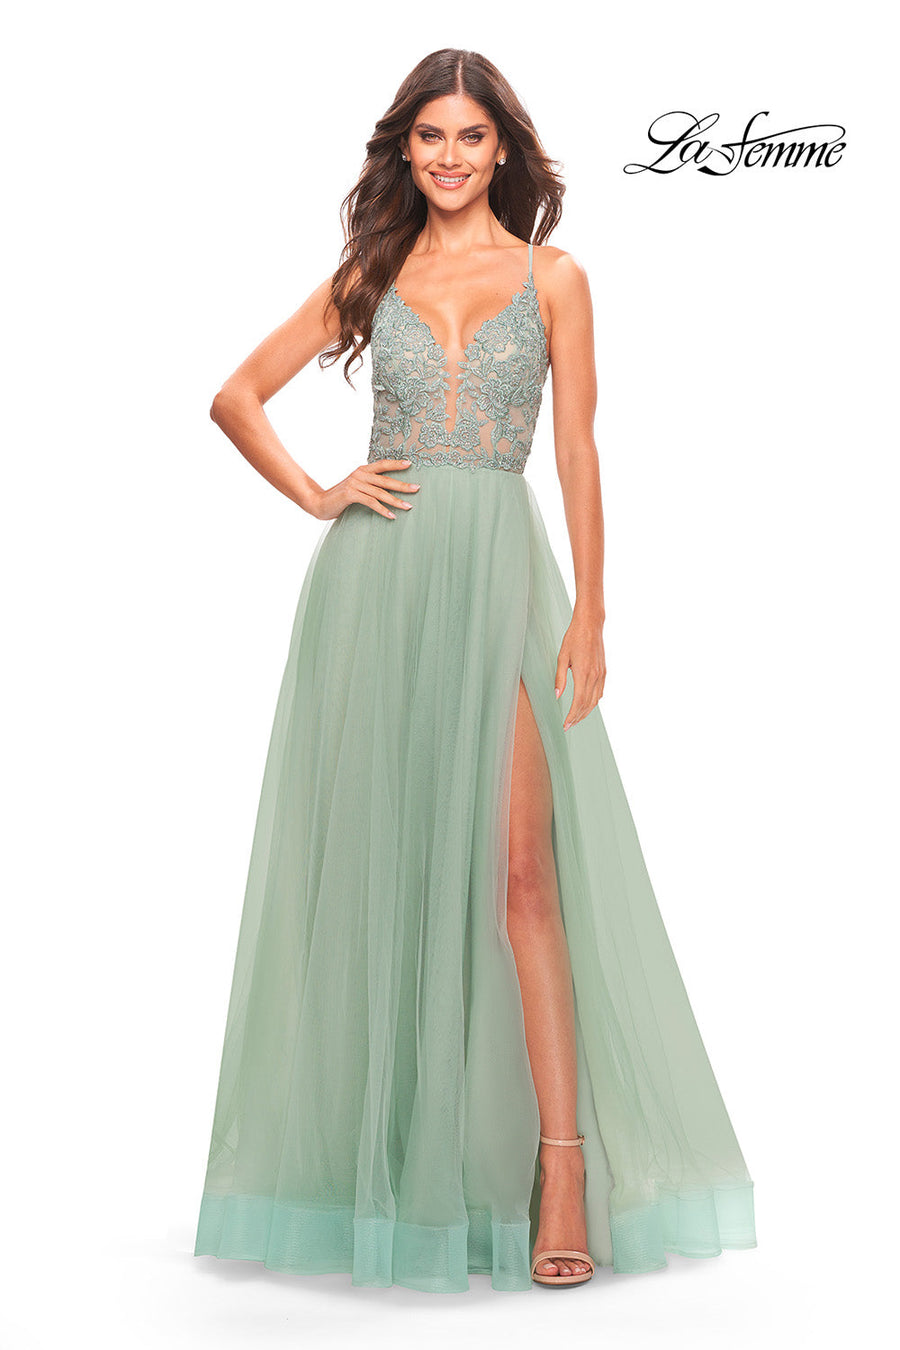 La Femme 31542 prom dress images.  La Femme 31542 is available in these colors: Light Periwinkle, Sage.